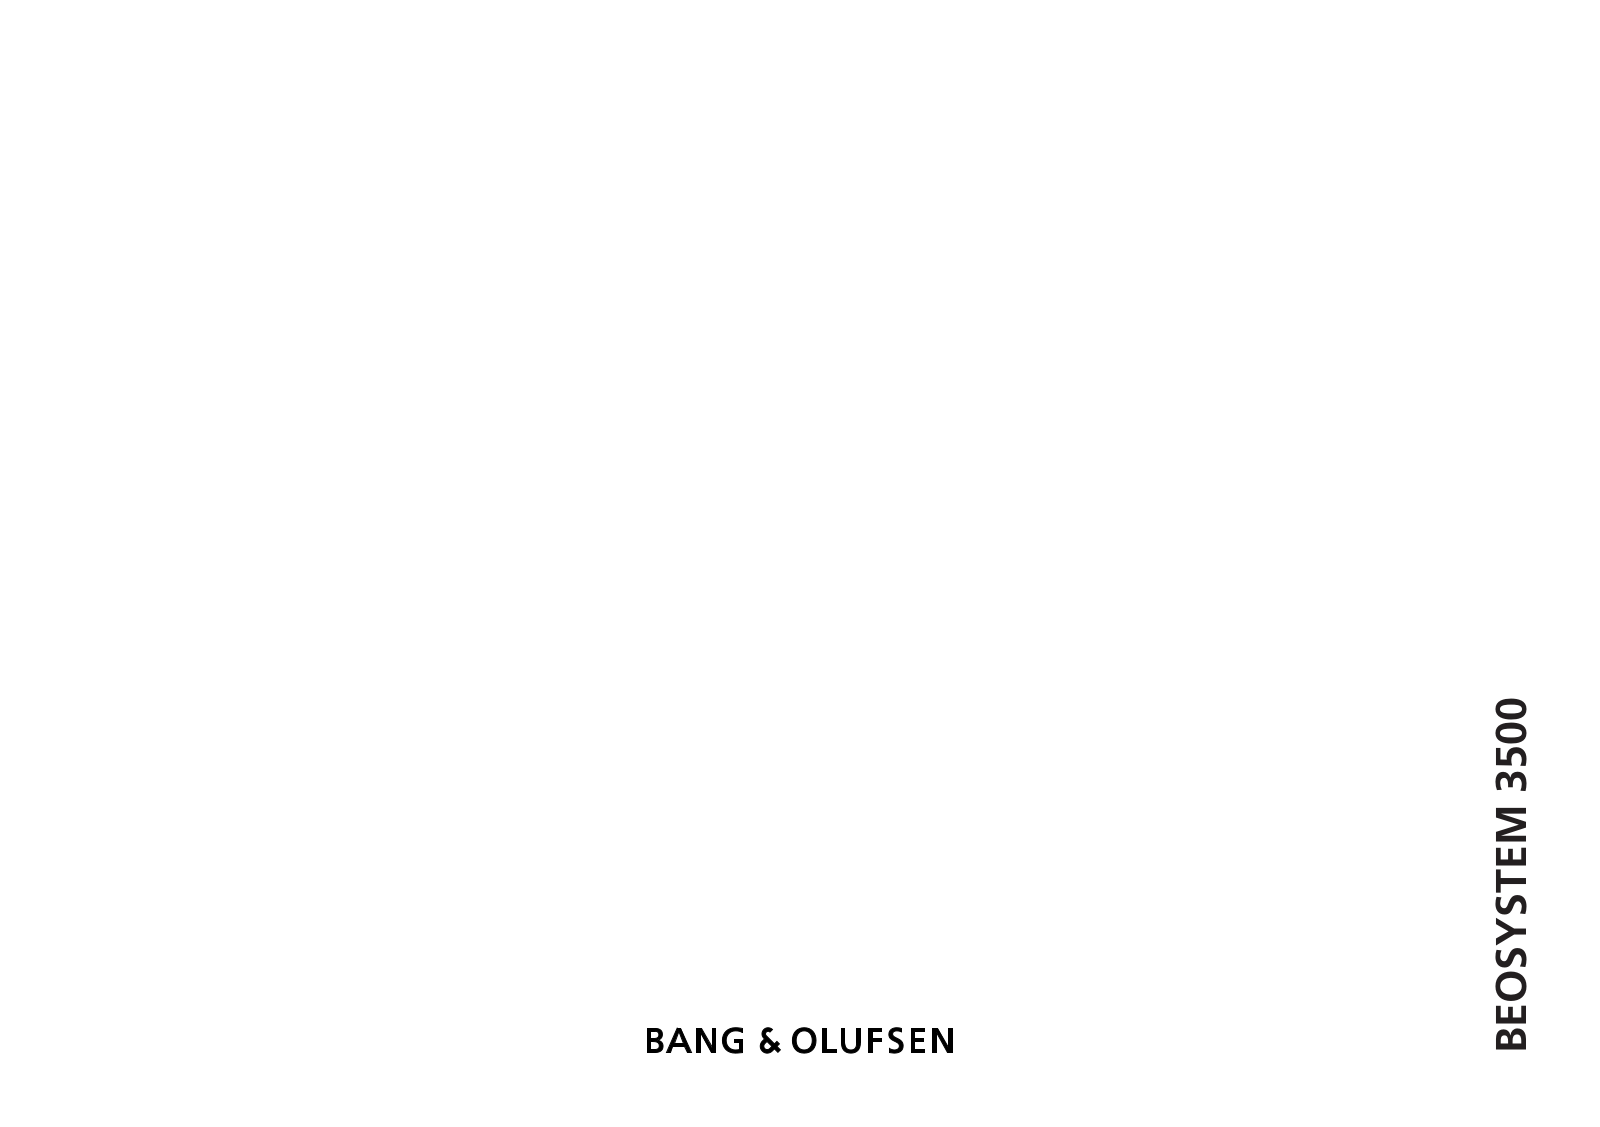 Bang Olufsen Beomaster 3500, Beosystem 3500 Owners Manual